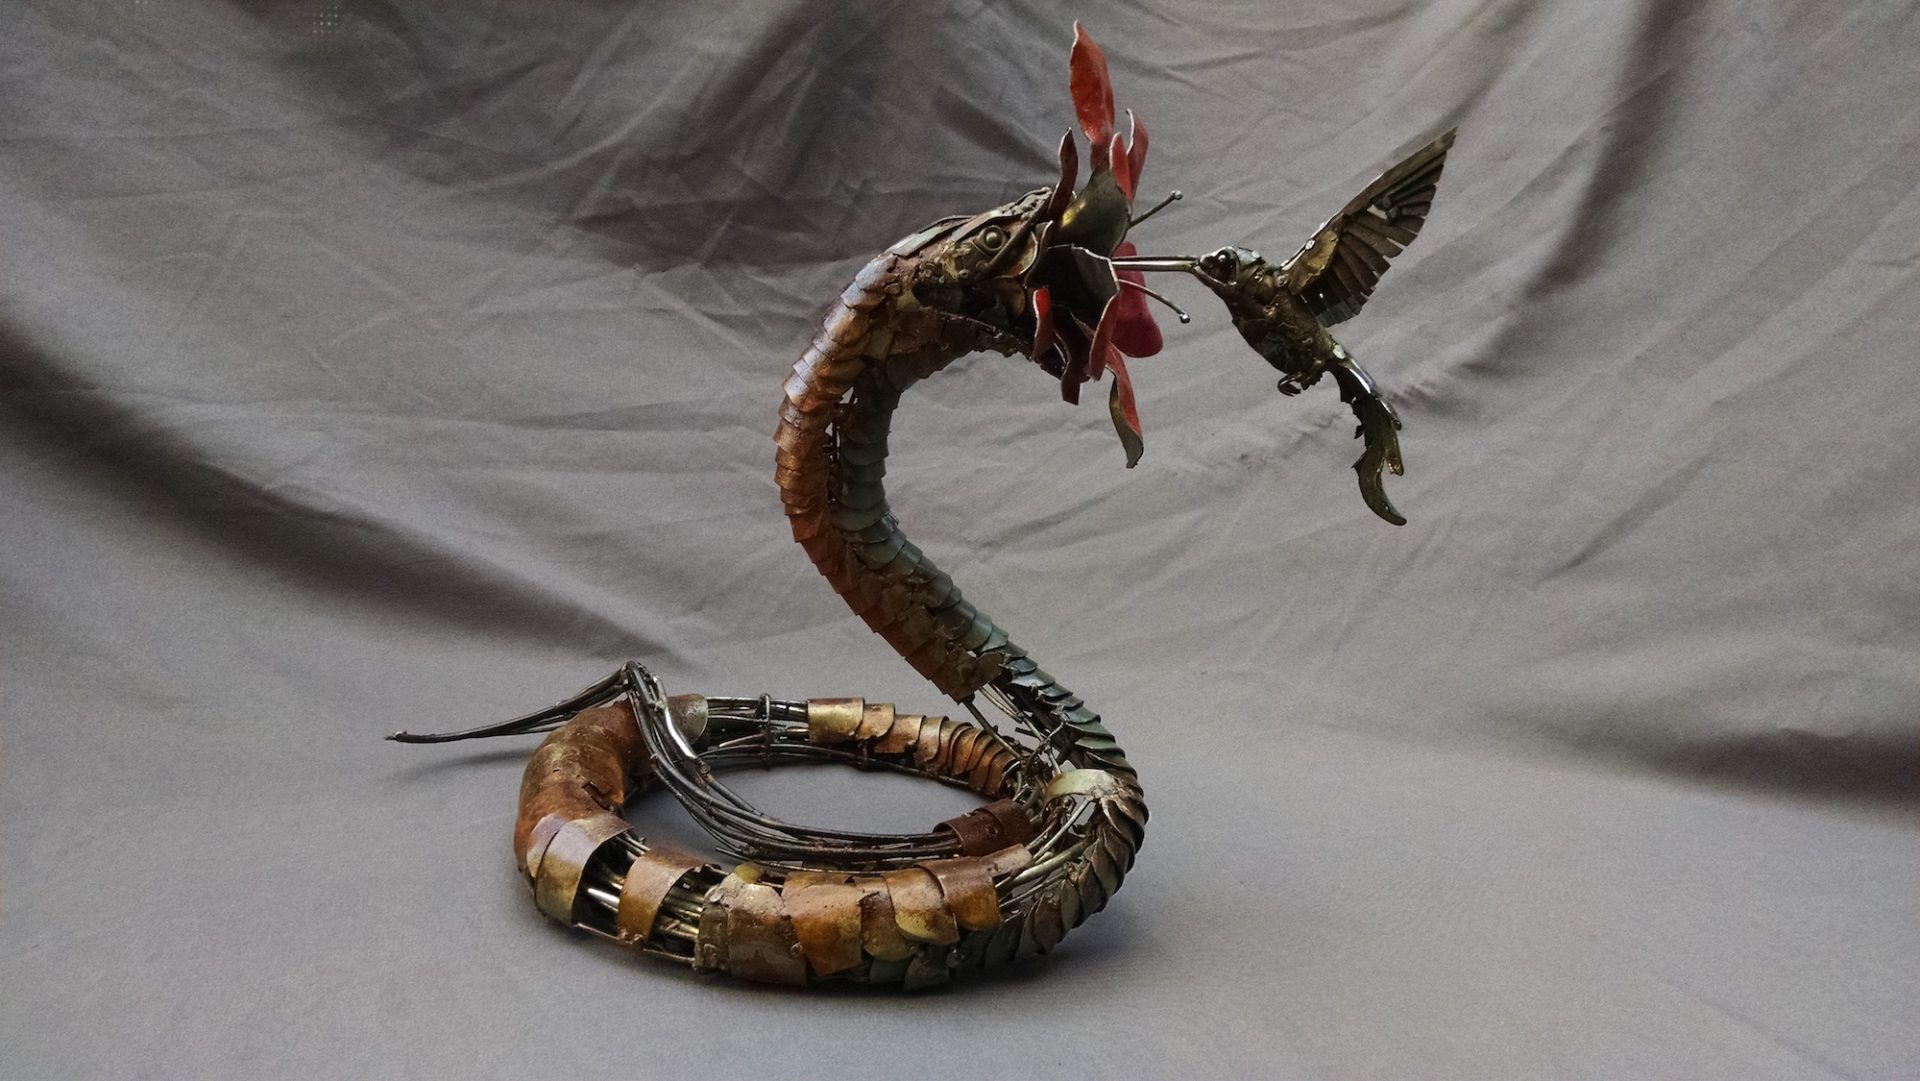 A metal sculpture by Andy White. A hummingbird attempts to pollinate a large flower which it cannot see is being held in the mouth of a large snake.